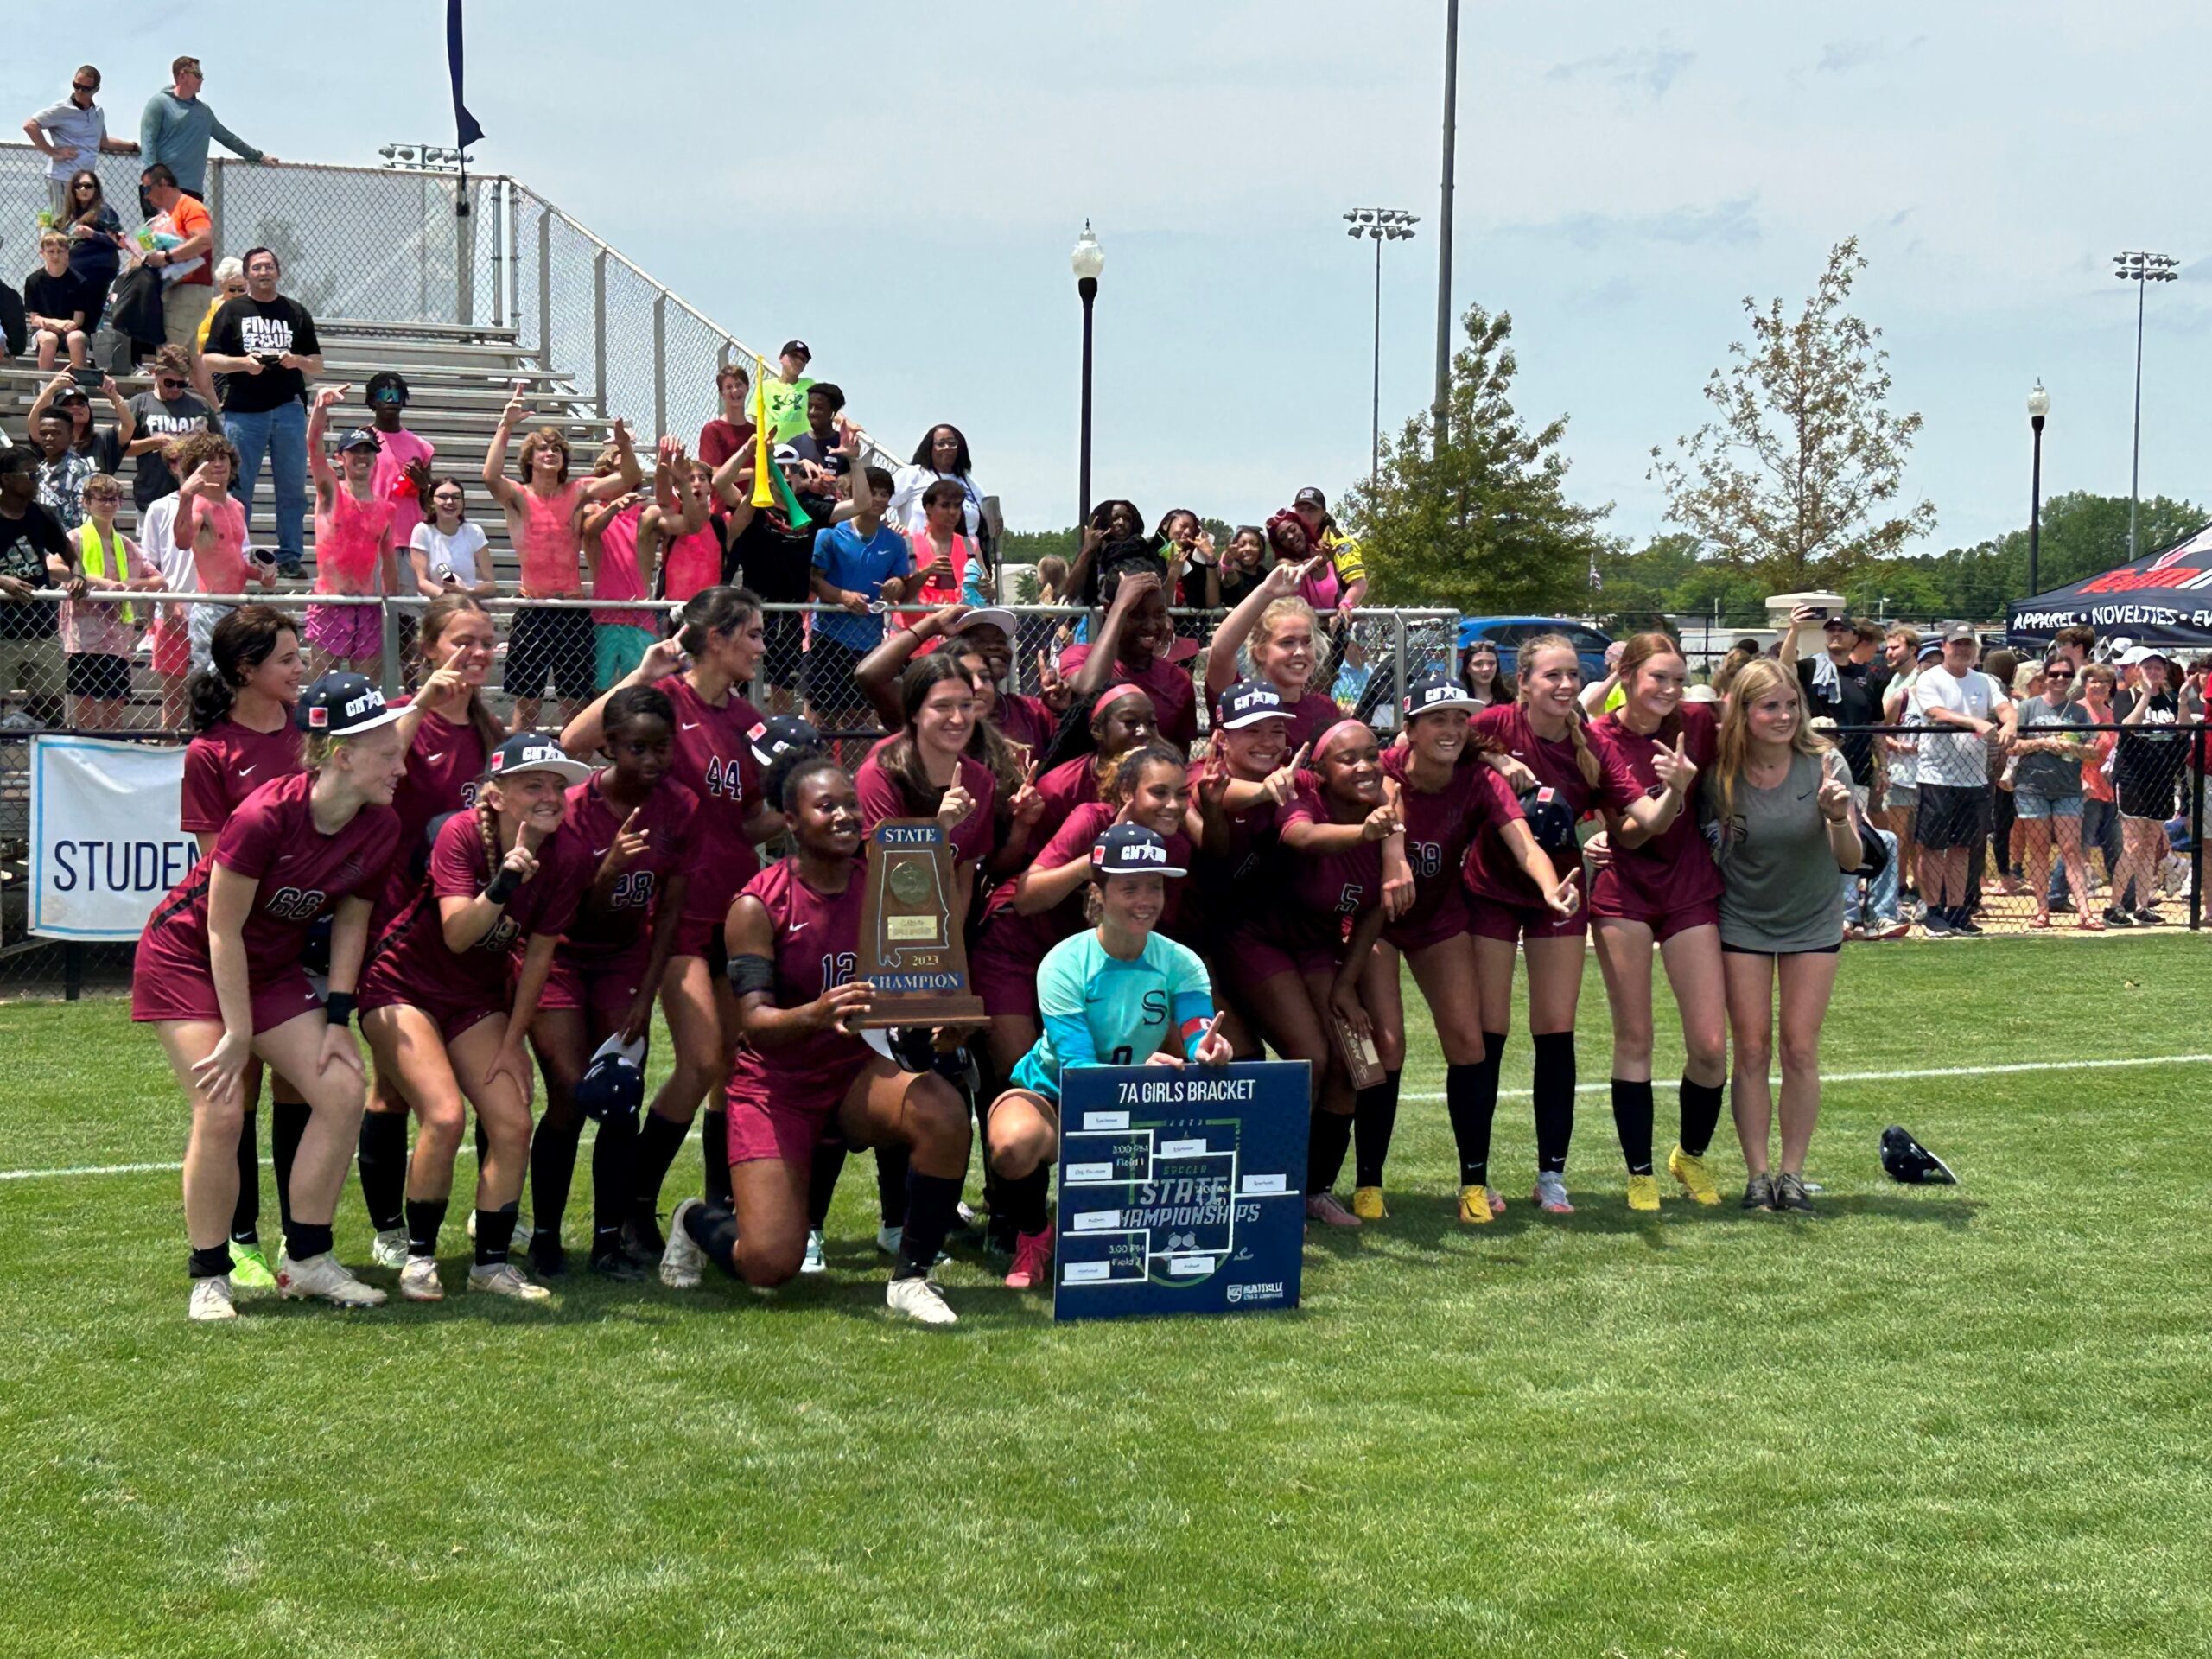 Sparkman Girls Soccer defeats Auburn to win state title - The Madison Record